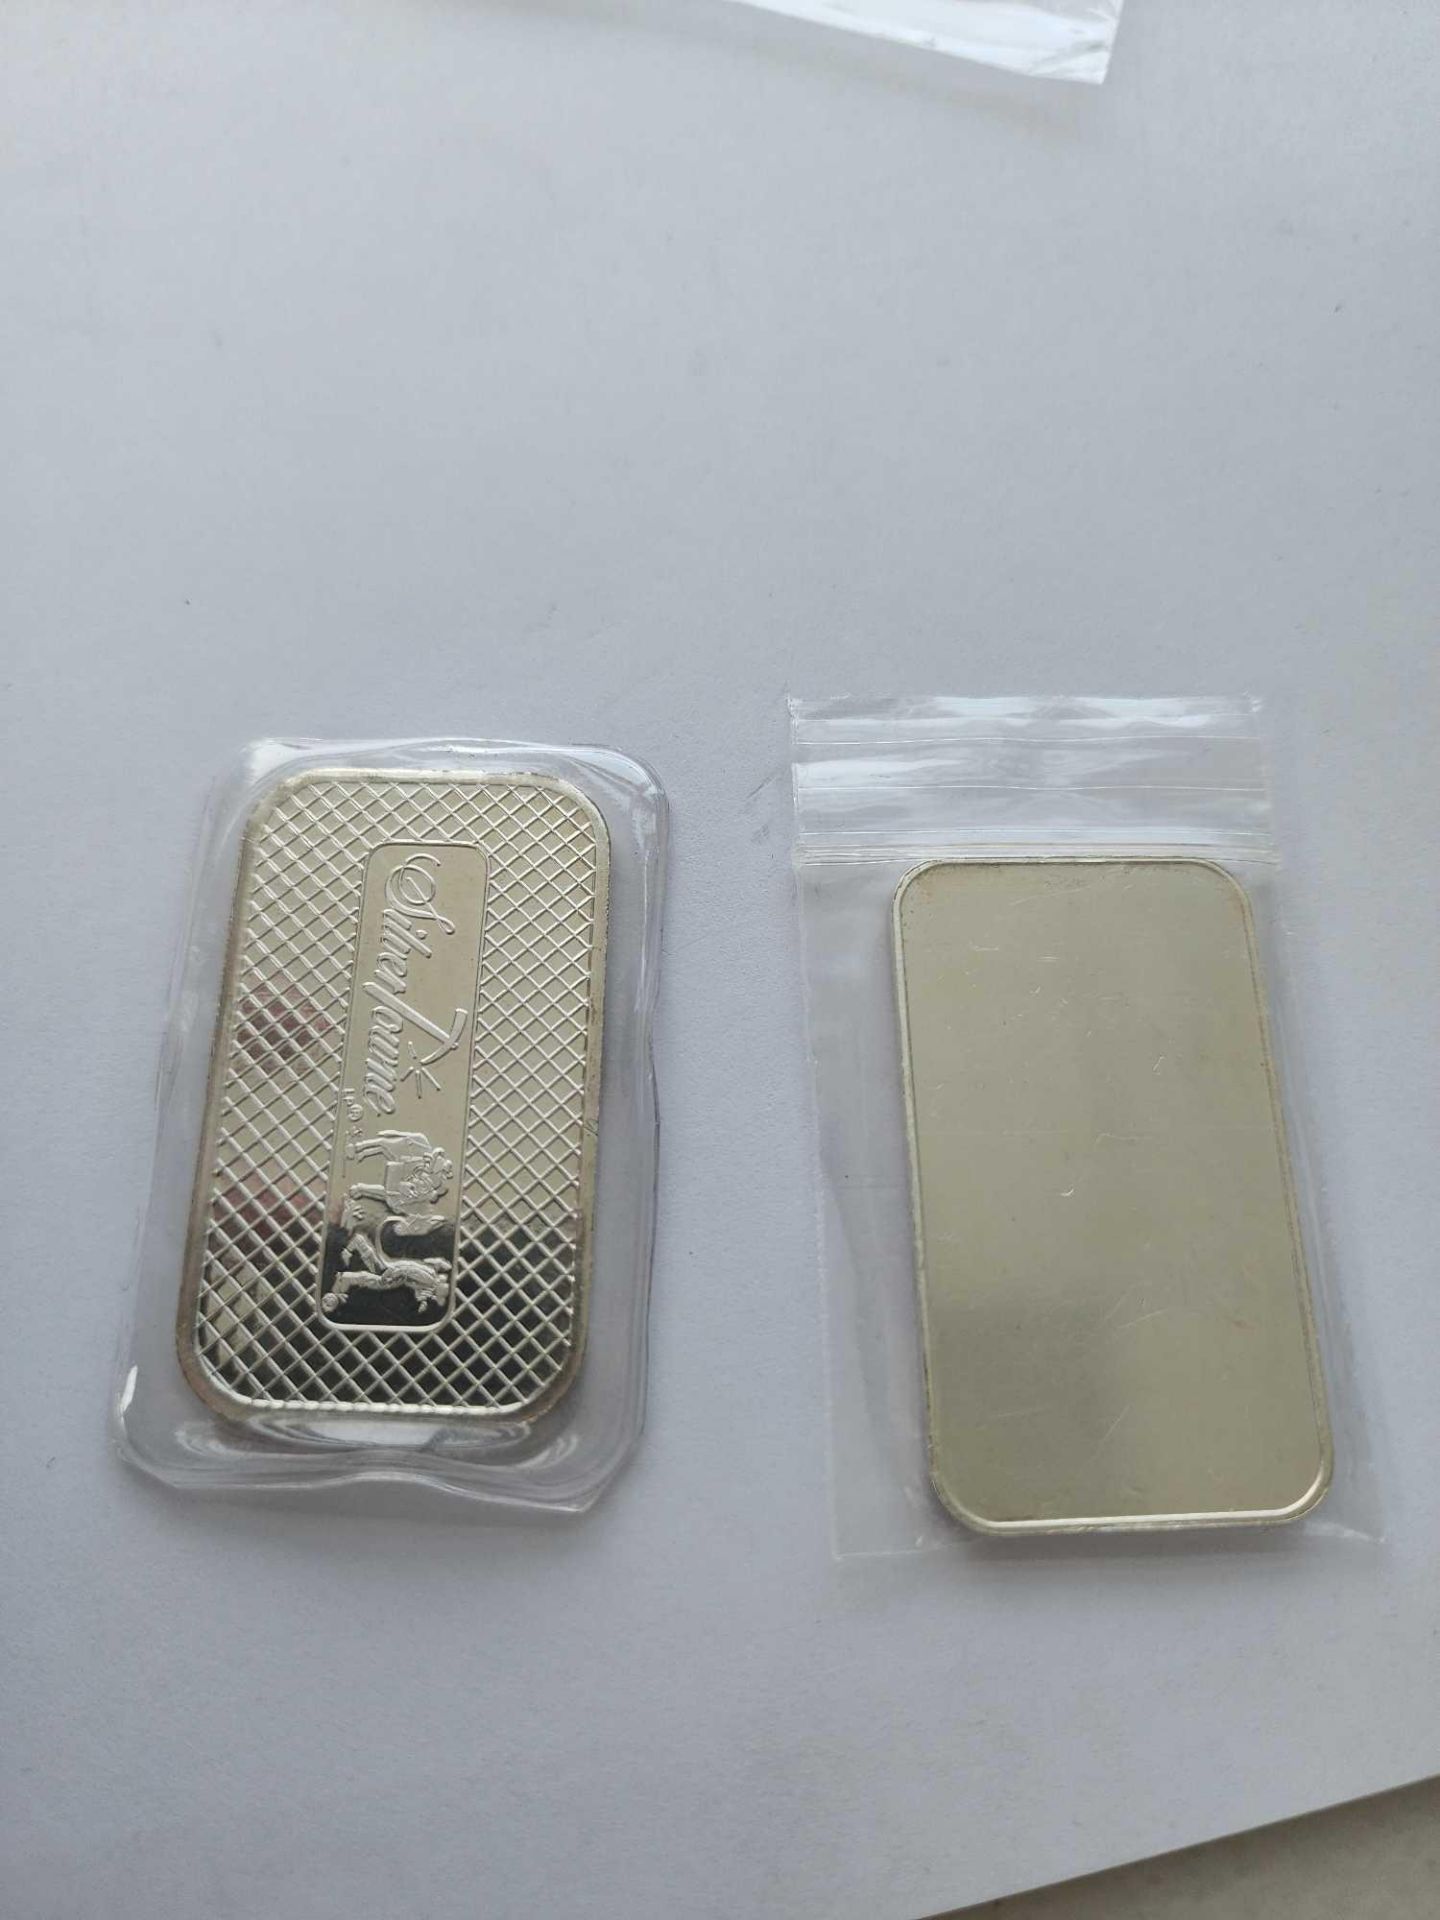 2 Misc Silver Bars - Image 2 of 3